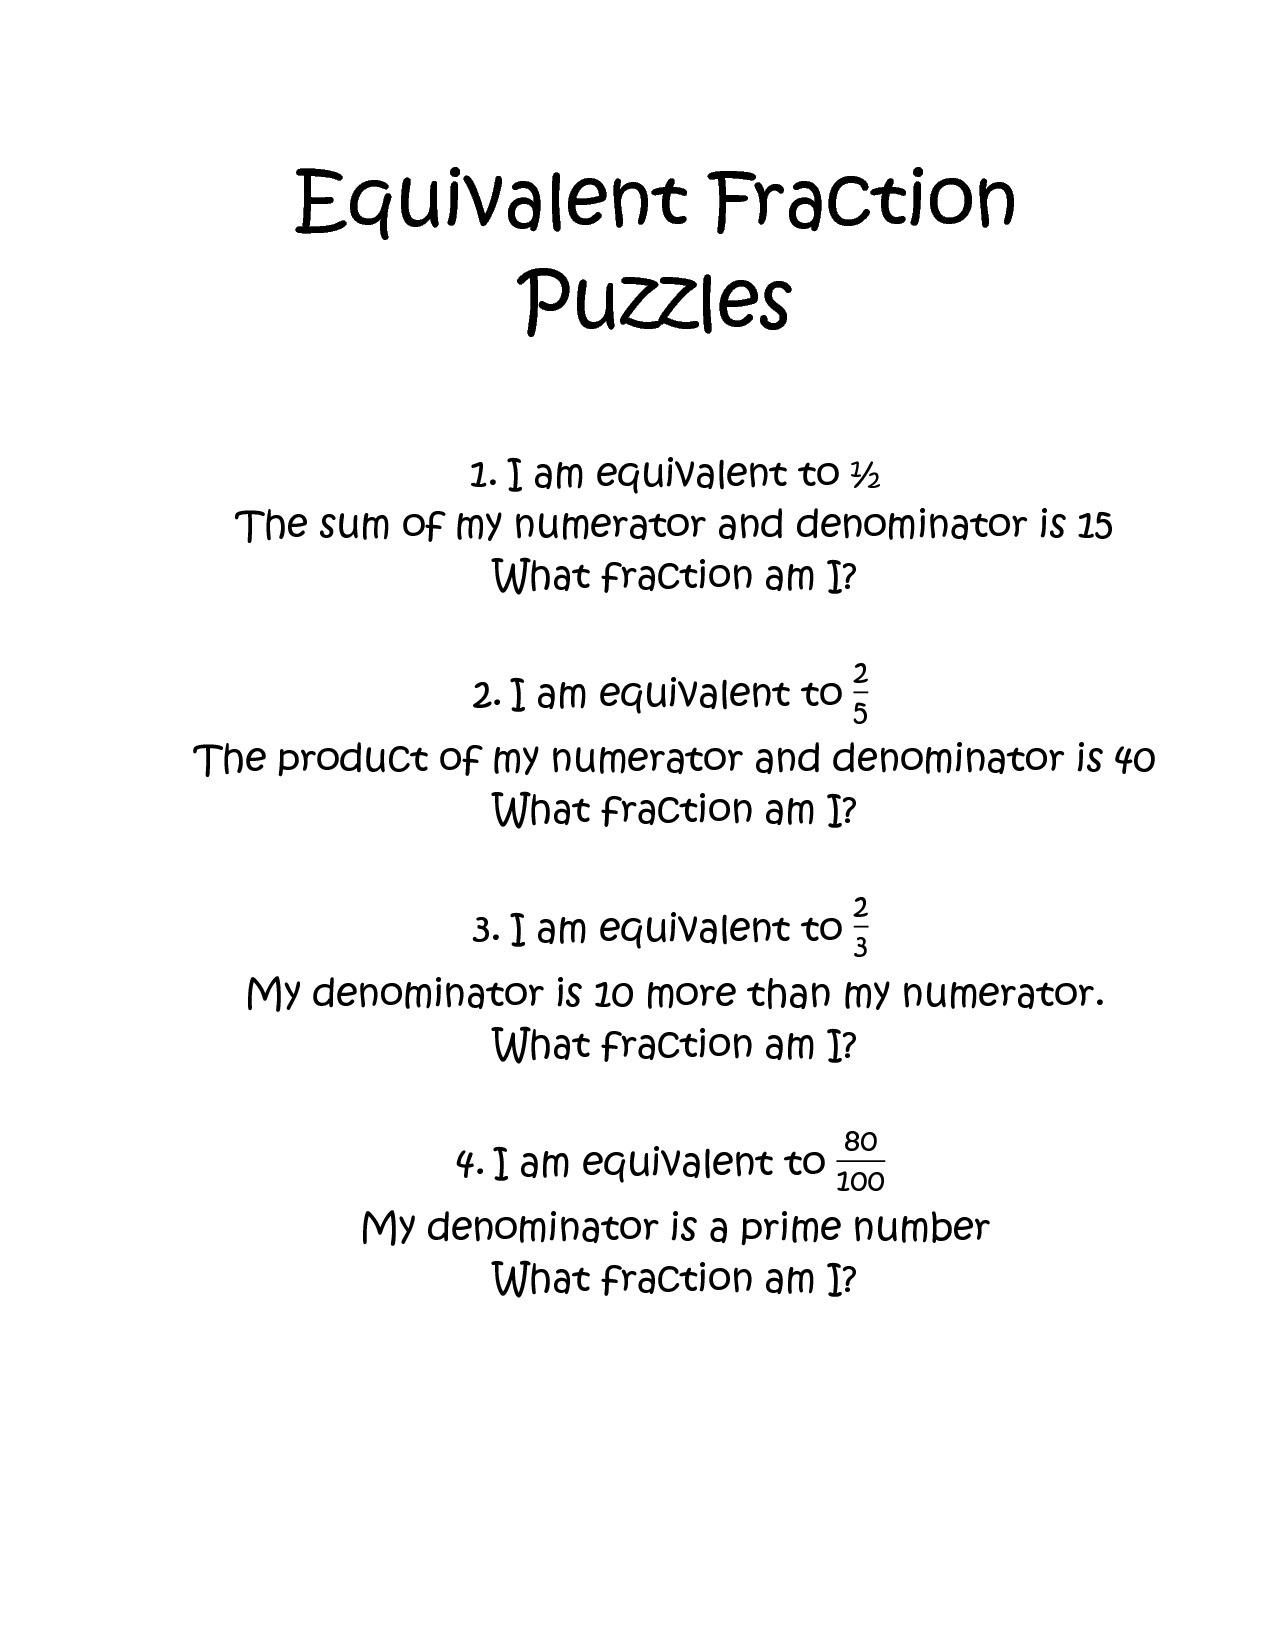 12 Best Images of Fraction Puzzle Worksheets - Multiplying Fractions